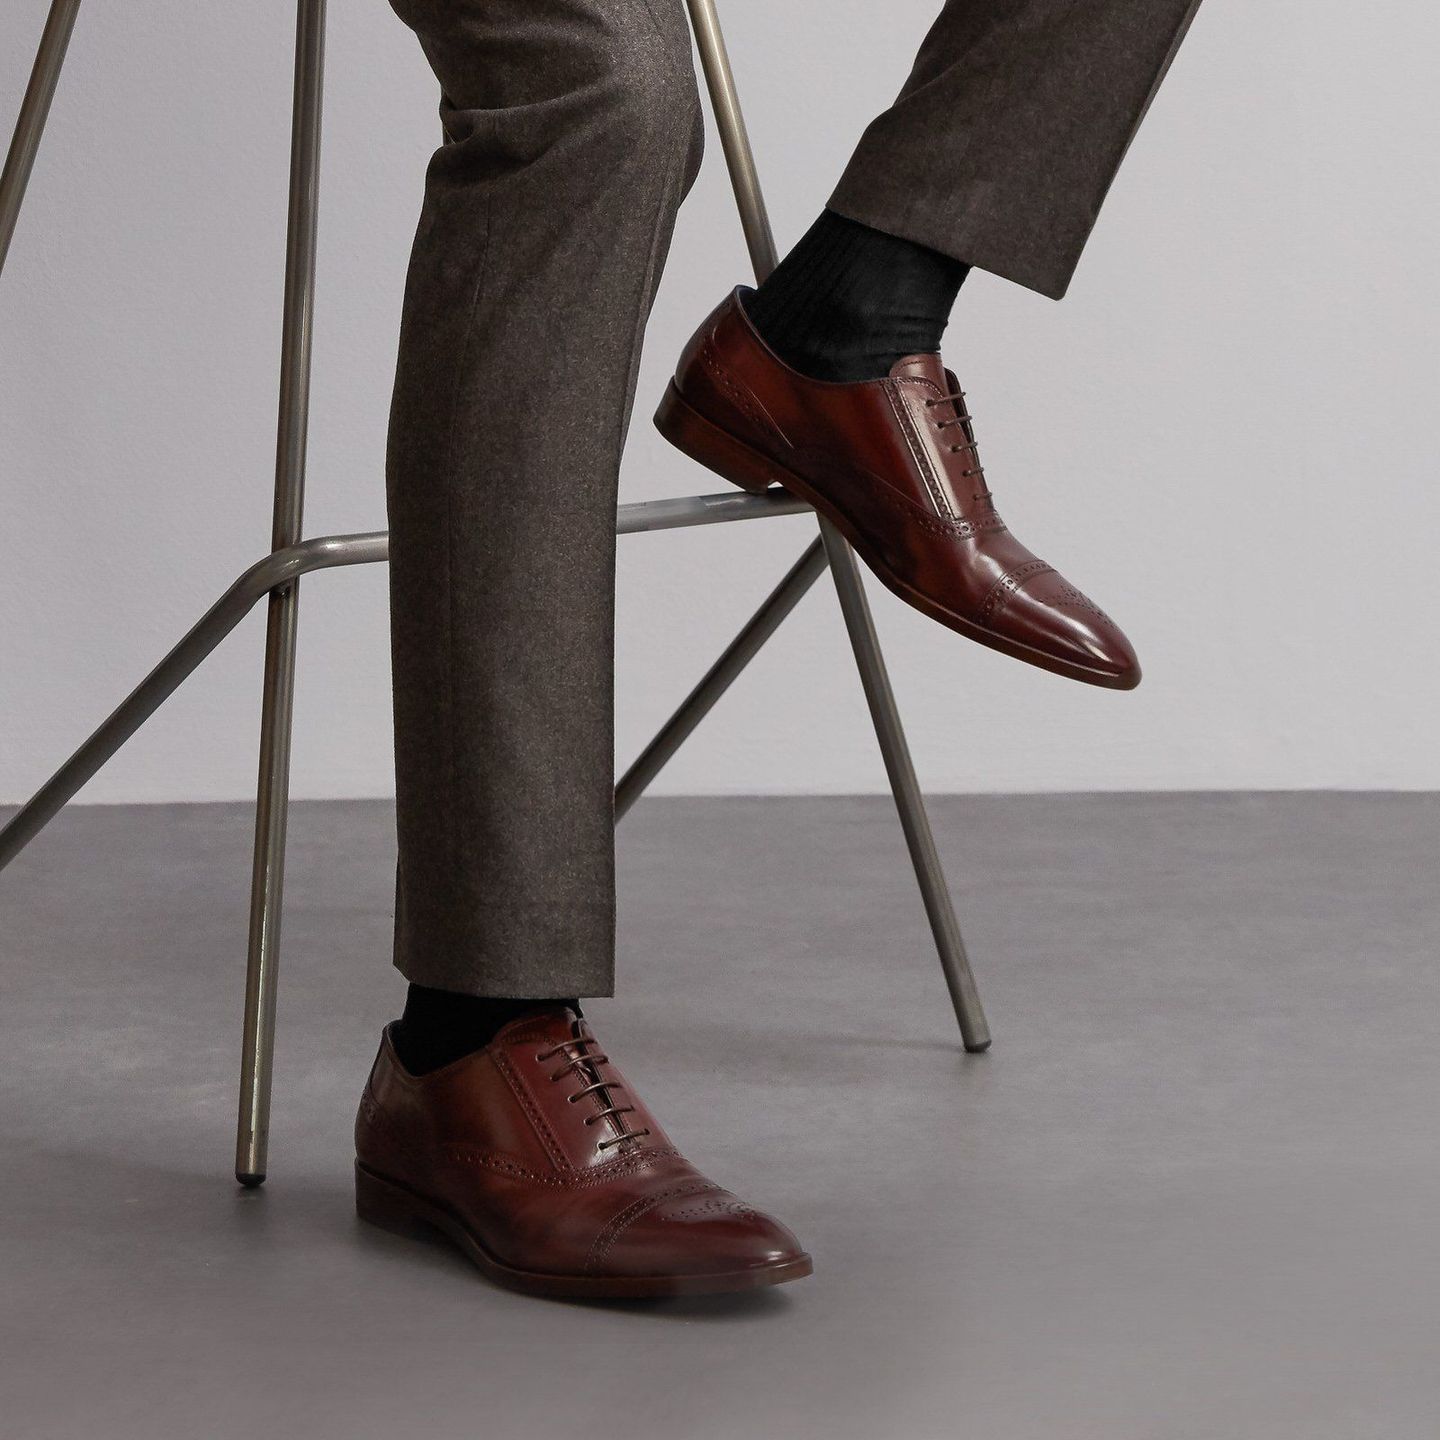 A close up of someone wearing dark grey socks with smart brown shoes